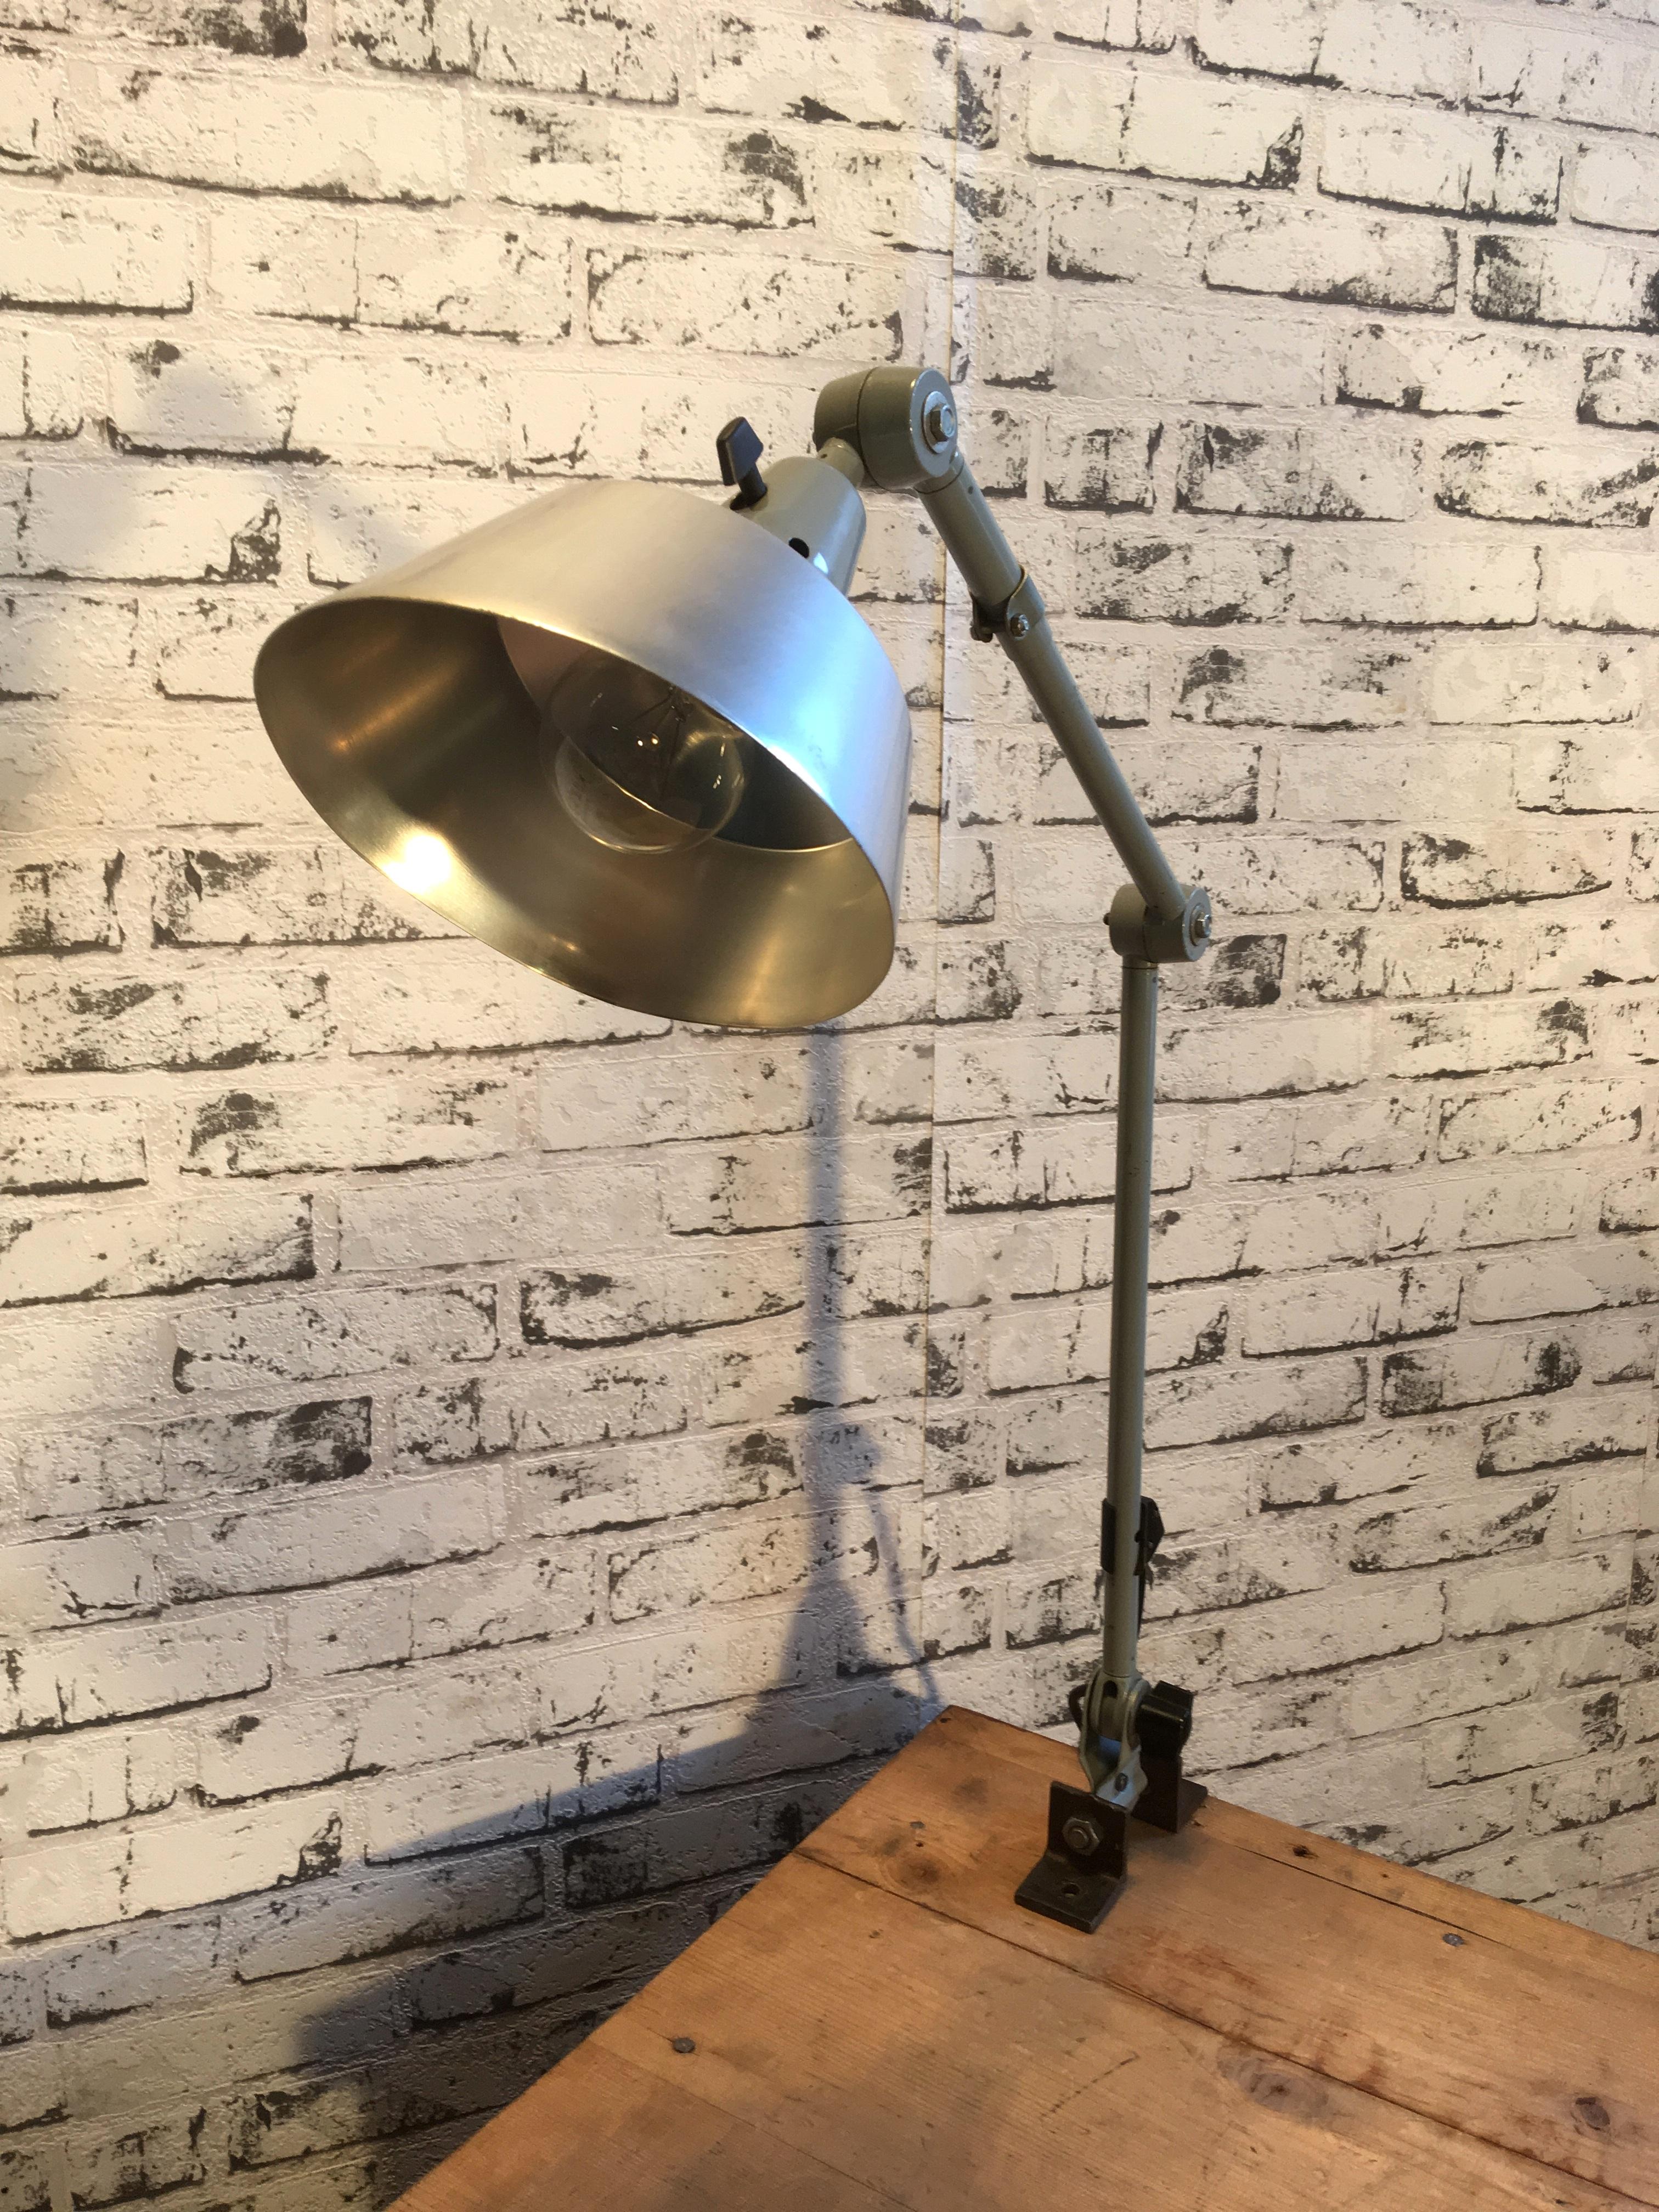 Mid-20th Century Vintage Desk or Wall Lamp by Curt Fischer for Midgard